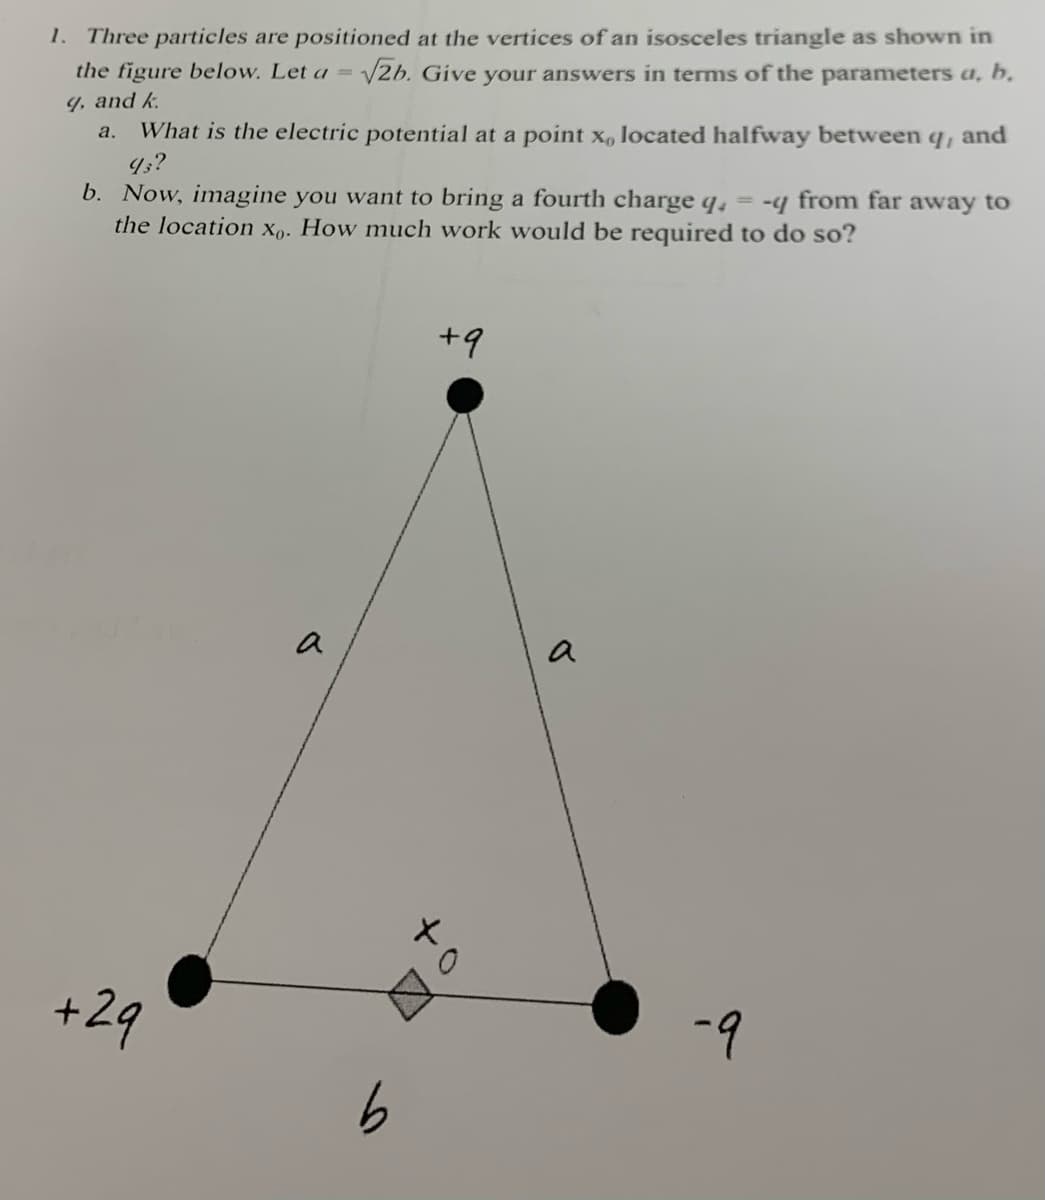 1. Three particles are positioned at the vertices of an isosceles triangle as shown in
the figure below. Let a = √2b. Give your answers in terms of the parameters a, b,
9, and k
a. What is the electric potential at a point x, located halfway between q, and
93?
b. Now, imagine you want to bring a fourth charge q = -q from far away to
the location xo. How much work would be required to do so?
+29
a
b
+9
a
-9